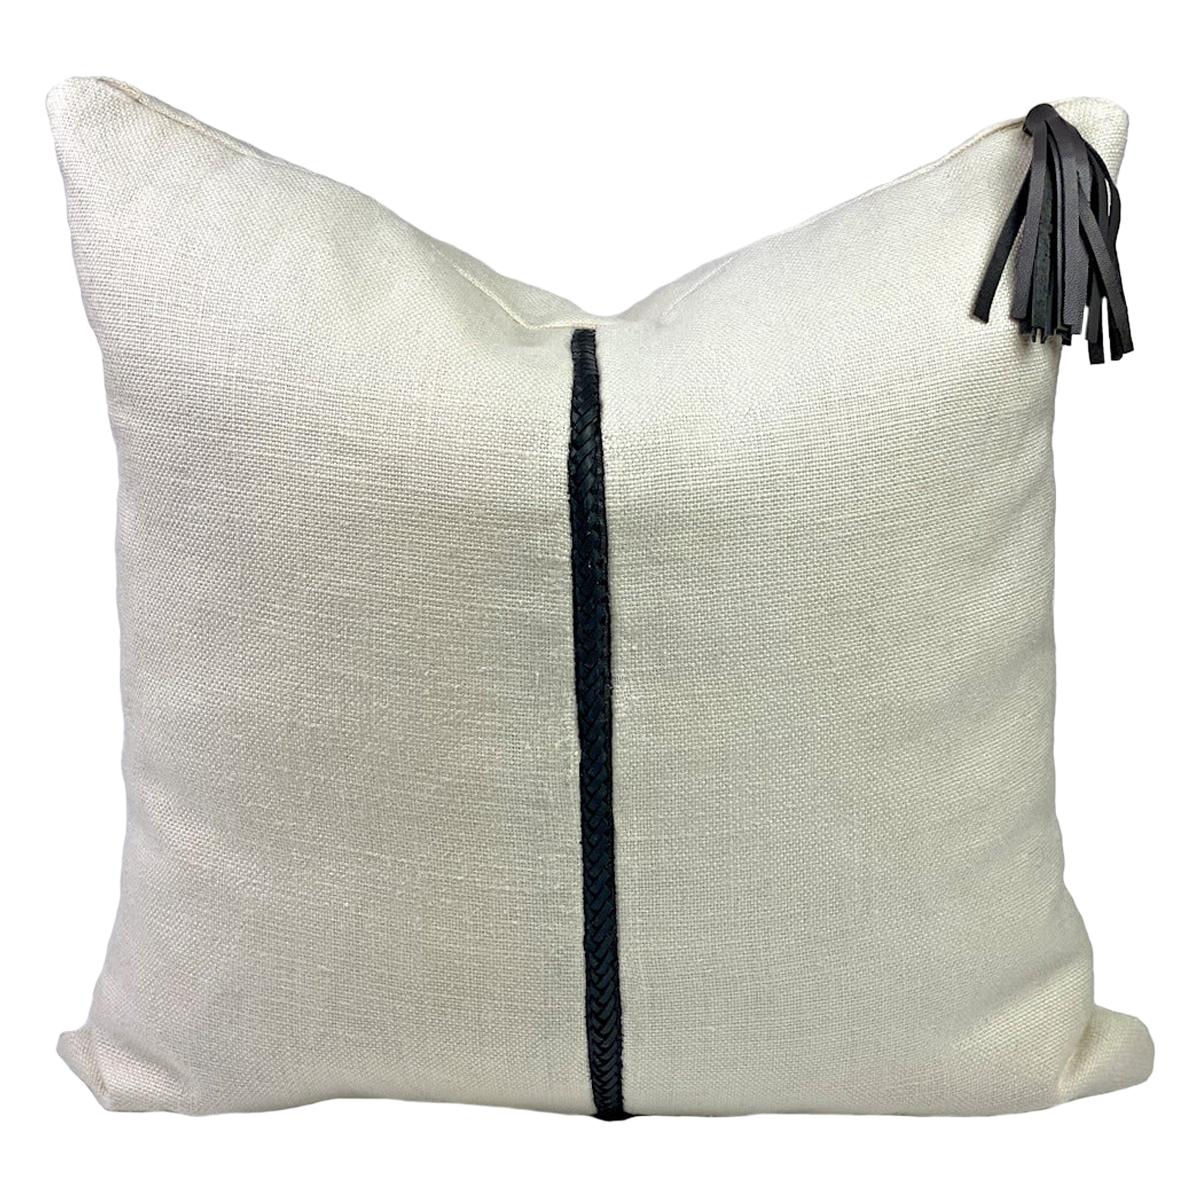 Linen Pillow with Grey Leather Trimming and Tassel